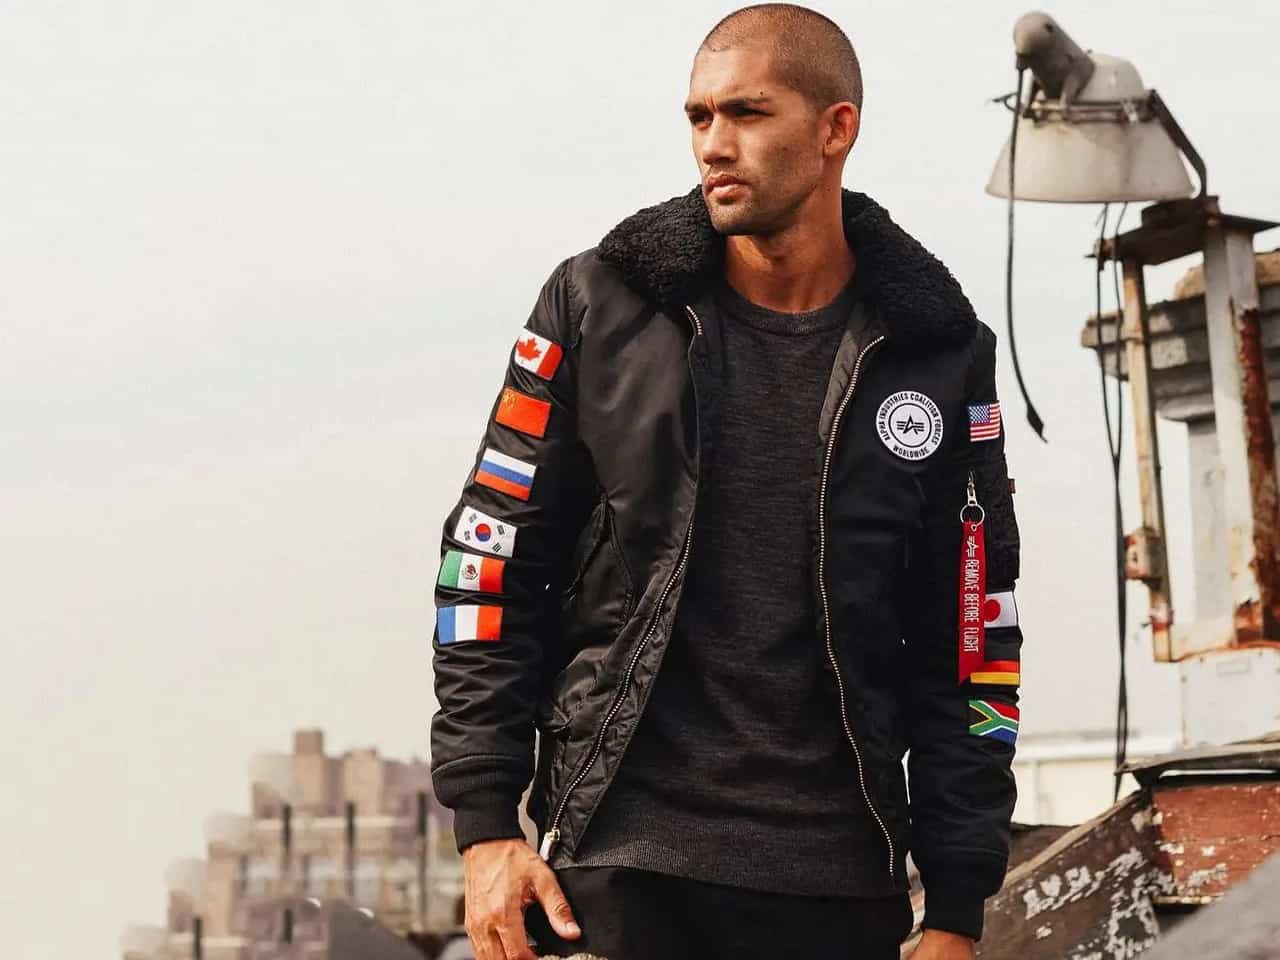 The 15 Best Er Jackets For Men In 2022, Who Makes The Best Leather Flight Jackets